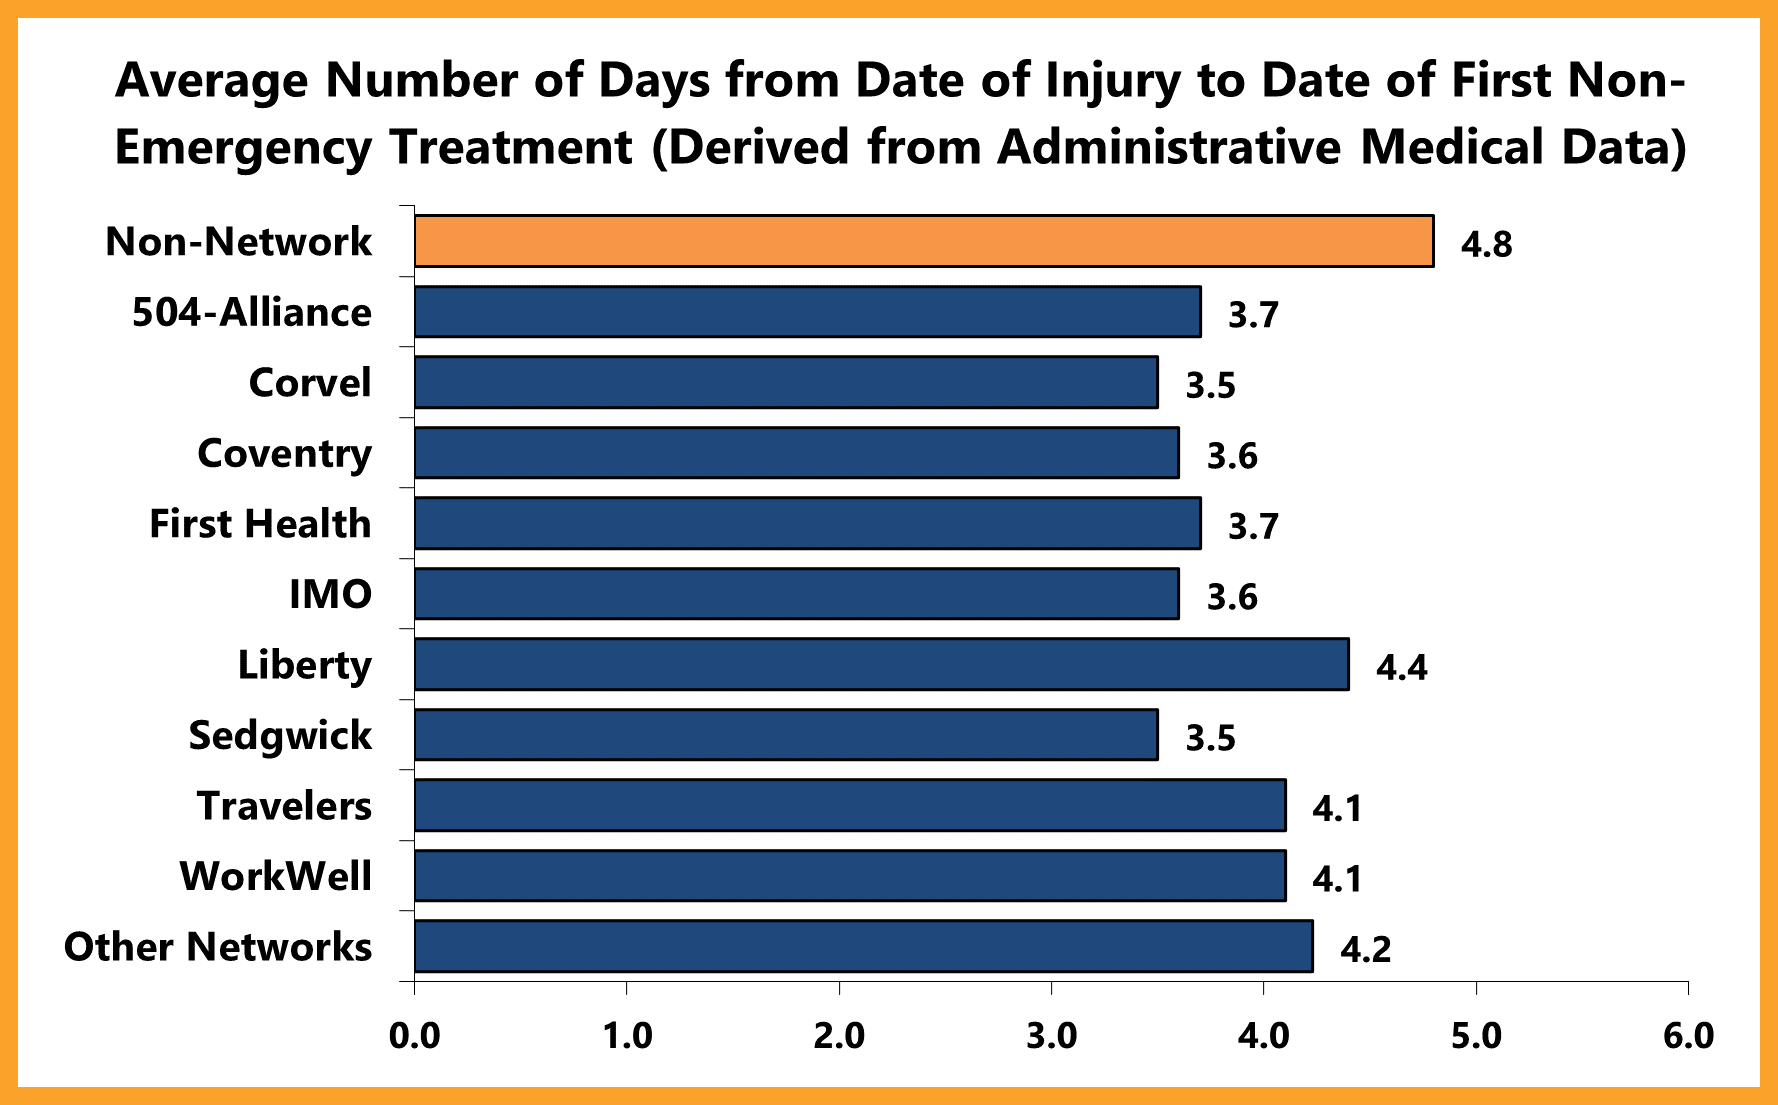 Average Number of Days from Date of Injury to Date of First Non-Emergency Treatment (derived from administrative medical data)